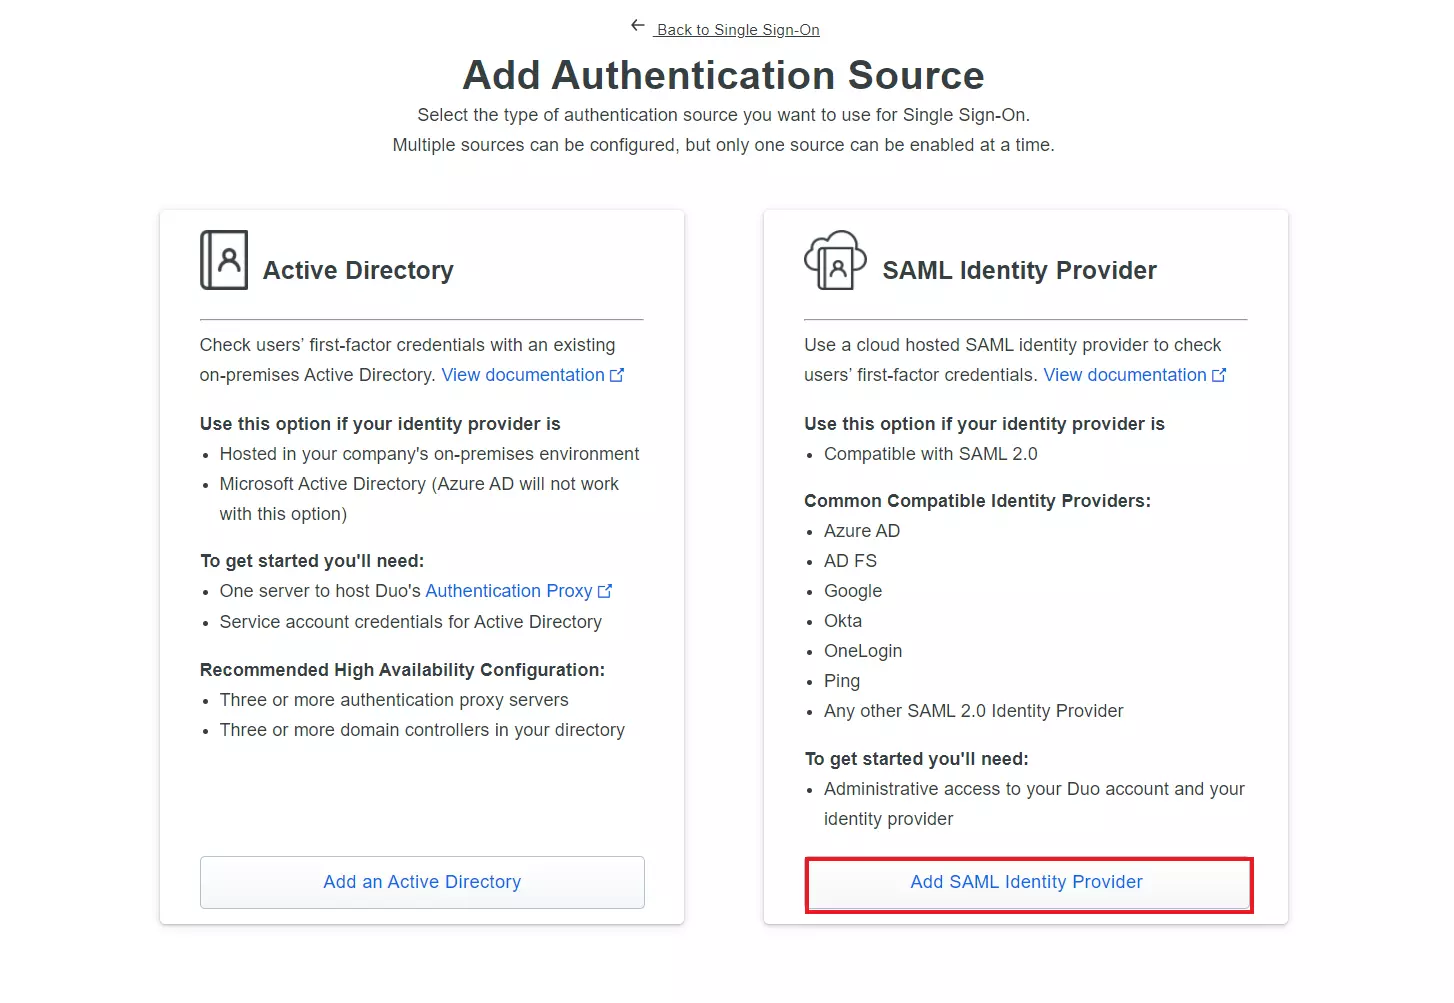 ASP.NET SAML Single Sign-On (SSO) using Duo as IDP - Select Authentication Source